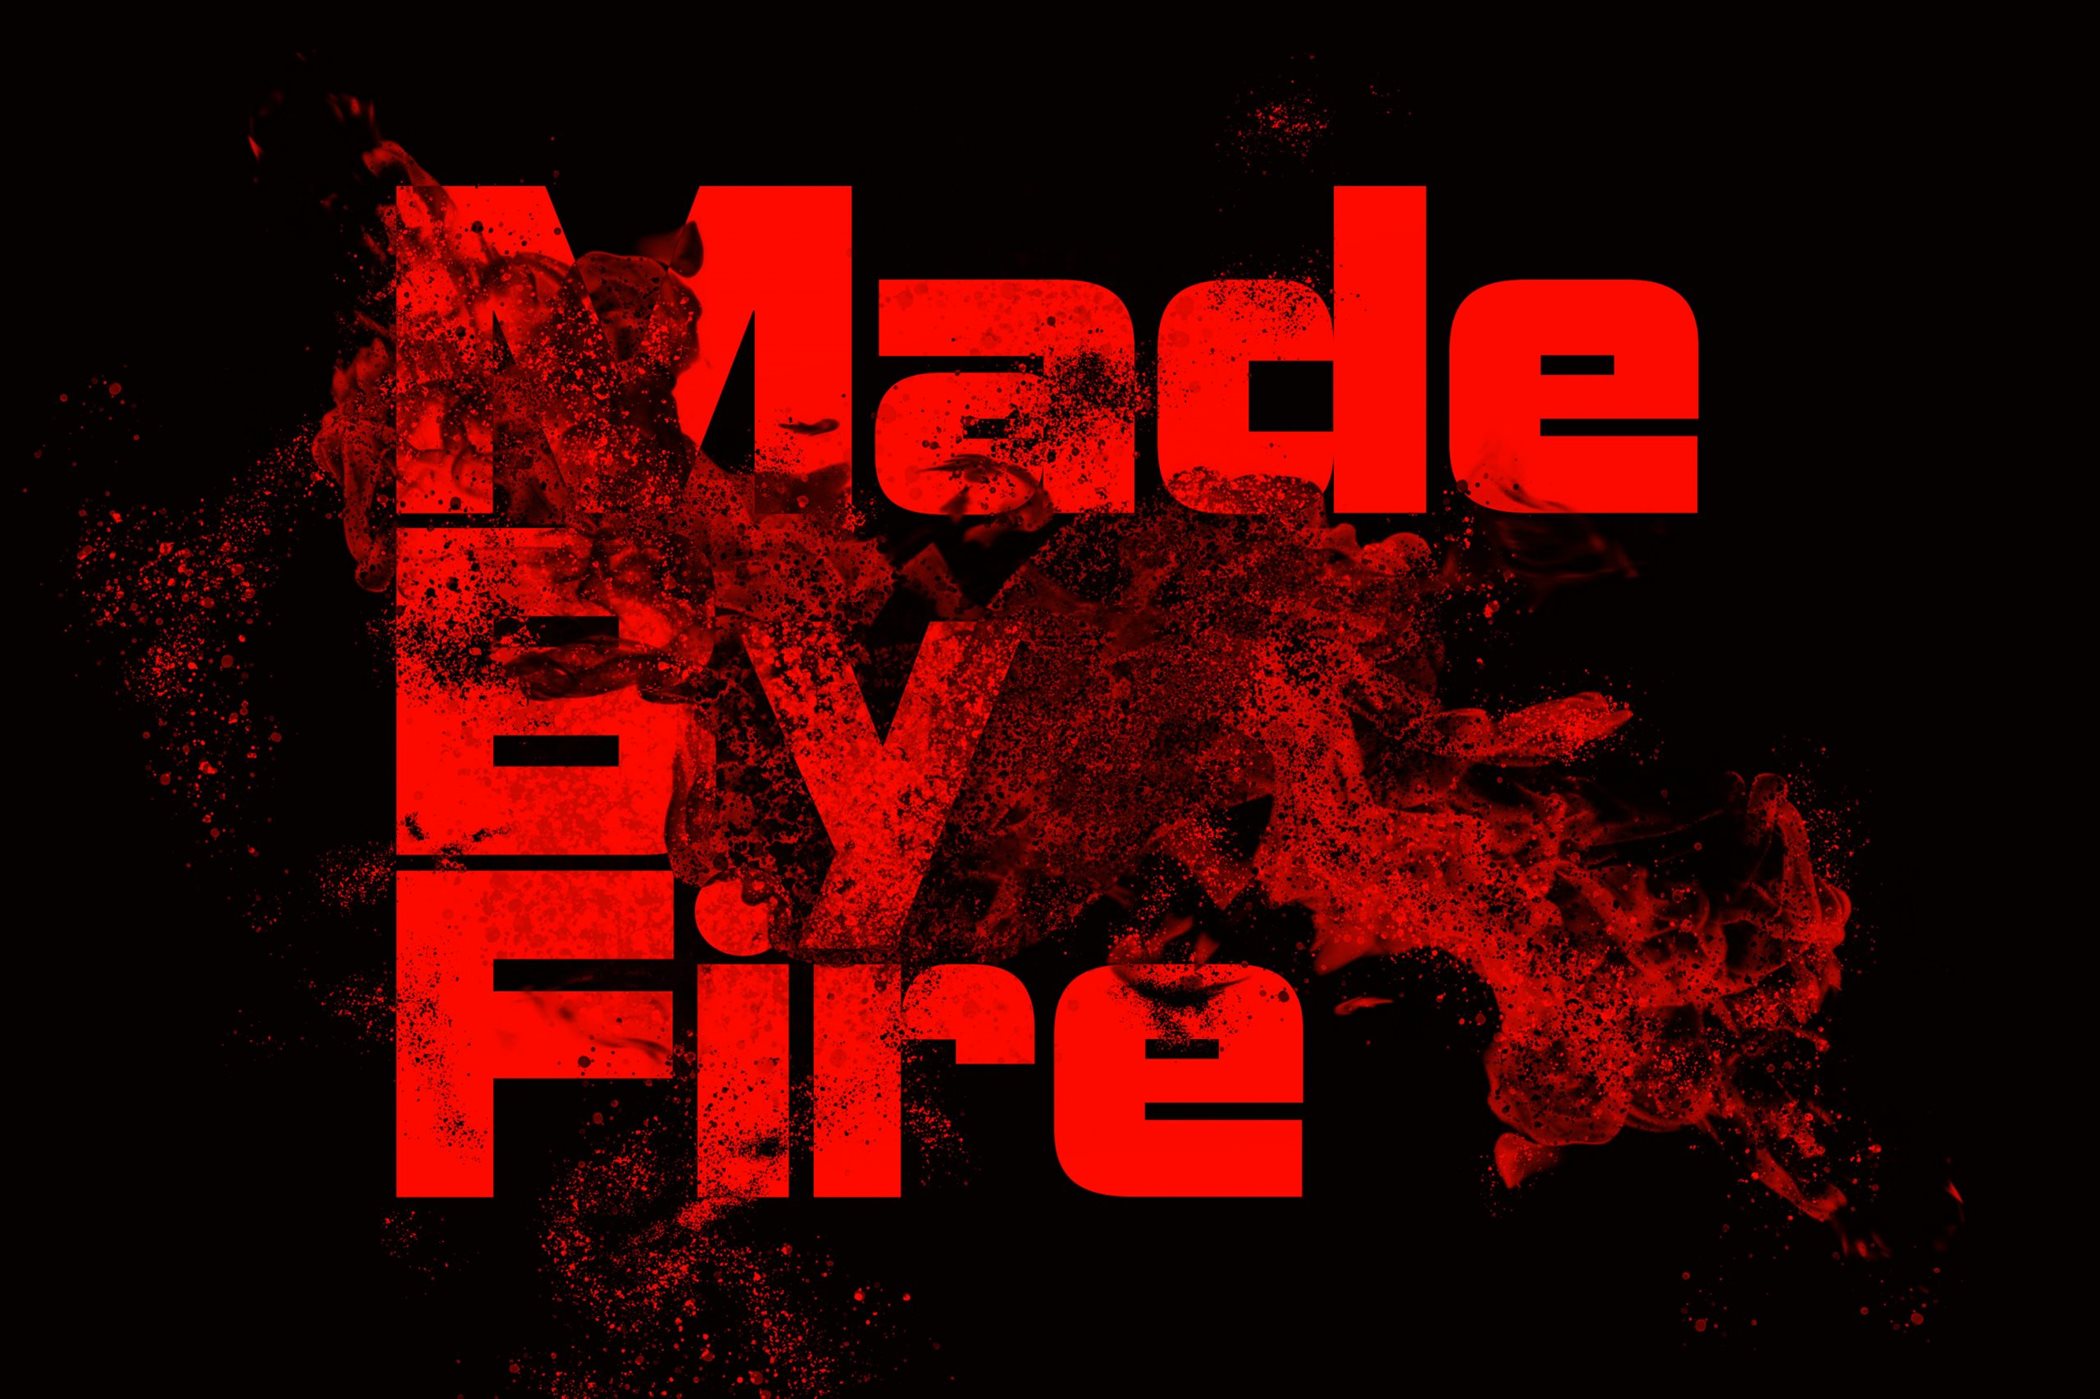 Made by Fire